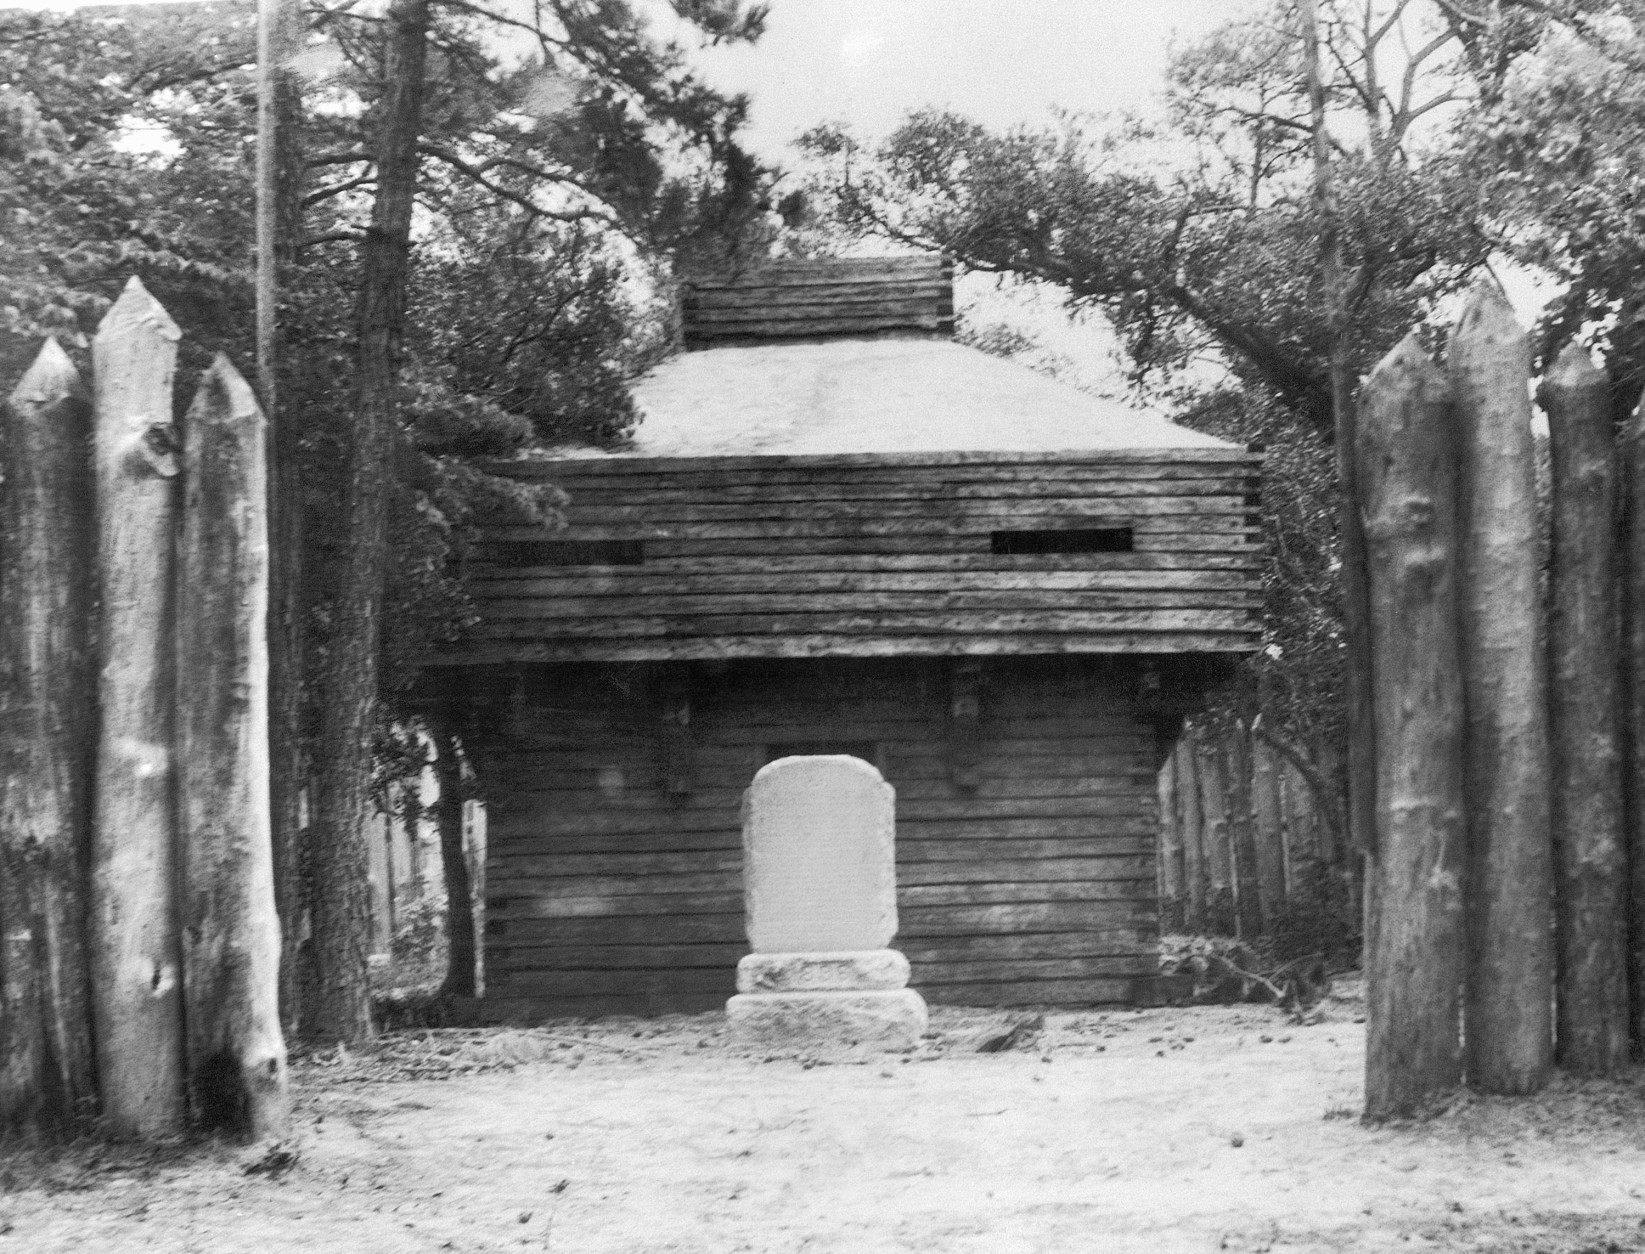 In this image provided by the Works Progress Administration, blockhouse and monument to Virginia Dare, Roanoke Island, South Carolina, Aug. 23, 1937. (AP Photo/Works Progress Administration) NO SALES